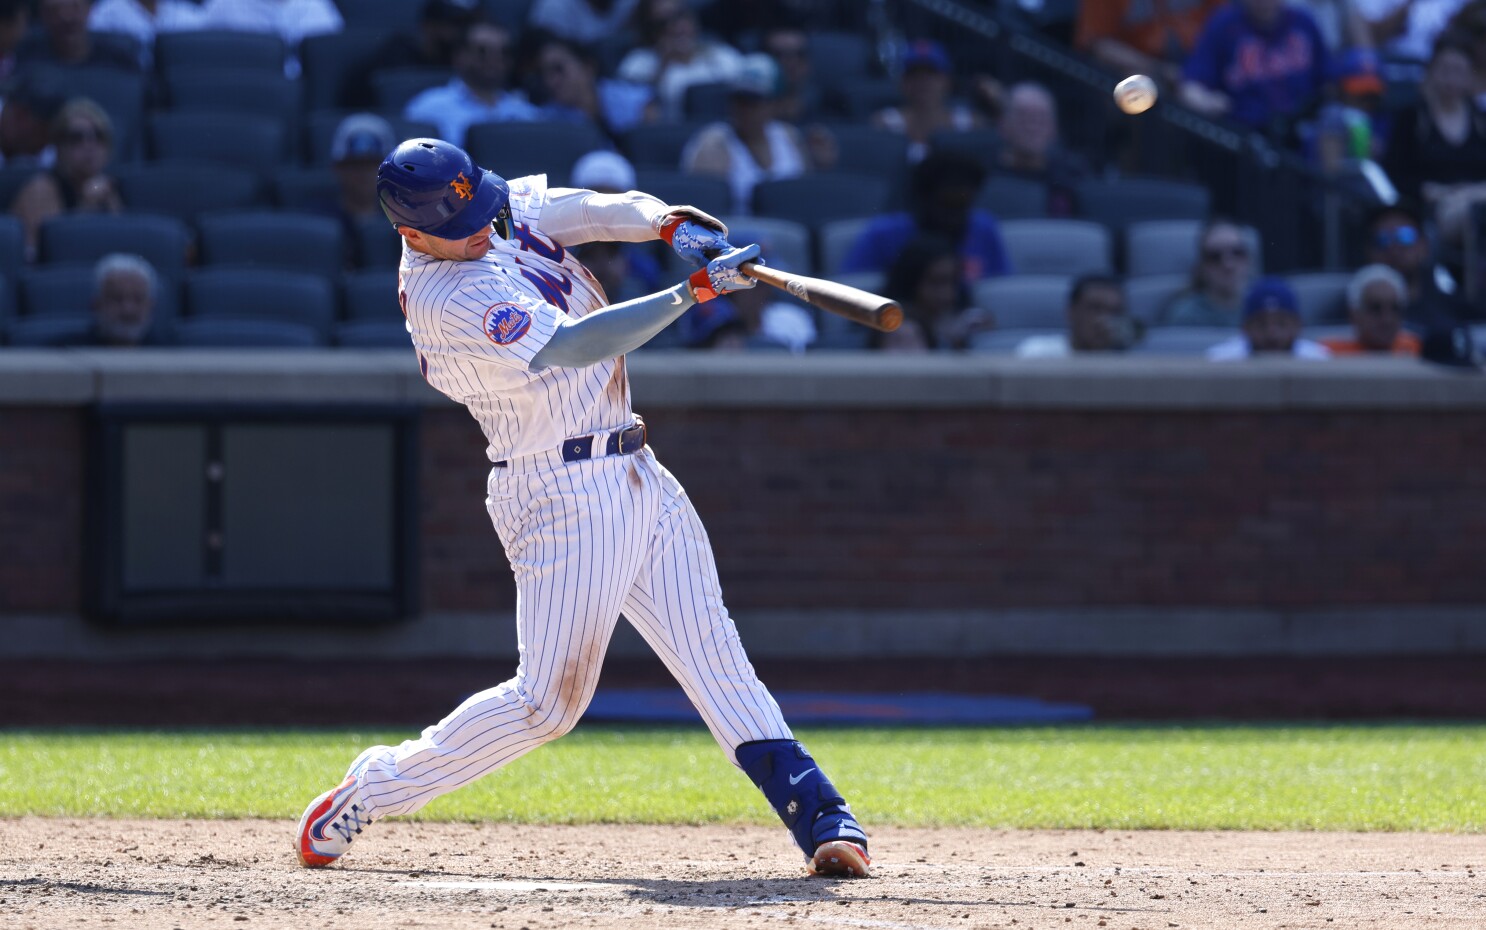 Alonso homers, drives in 4 as Mets hold off Phillies 8-6